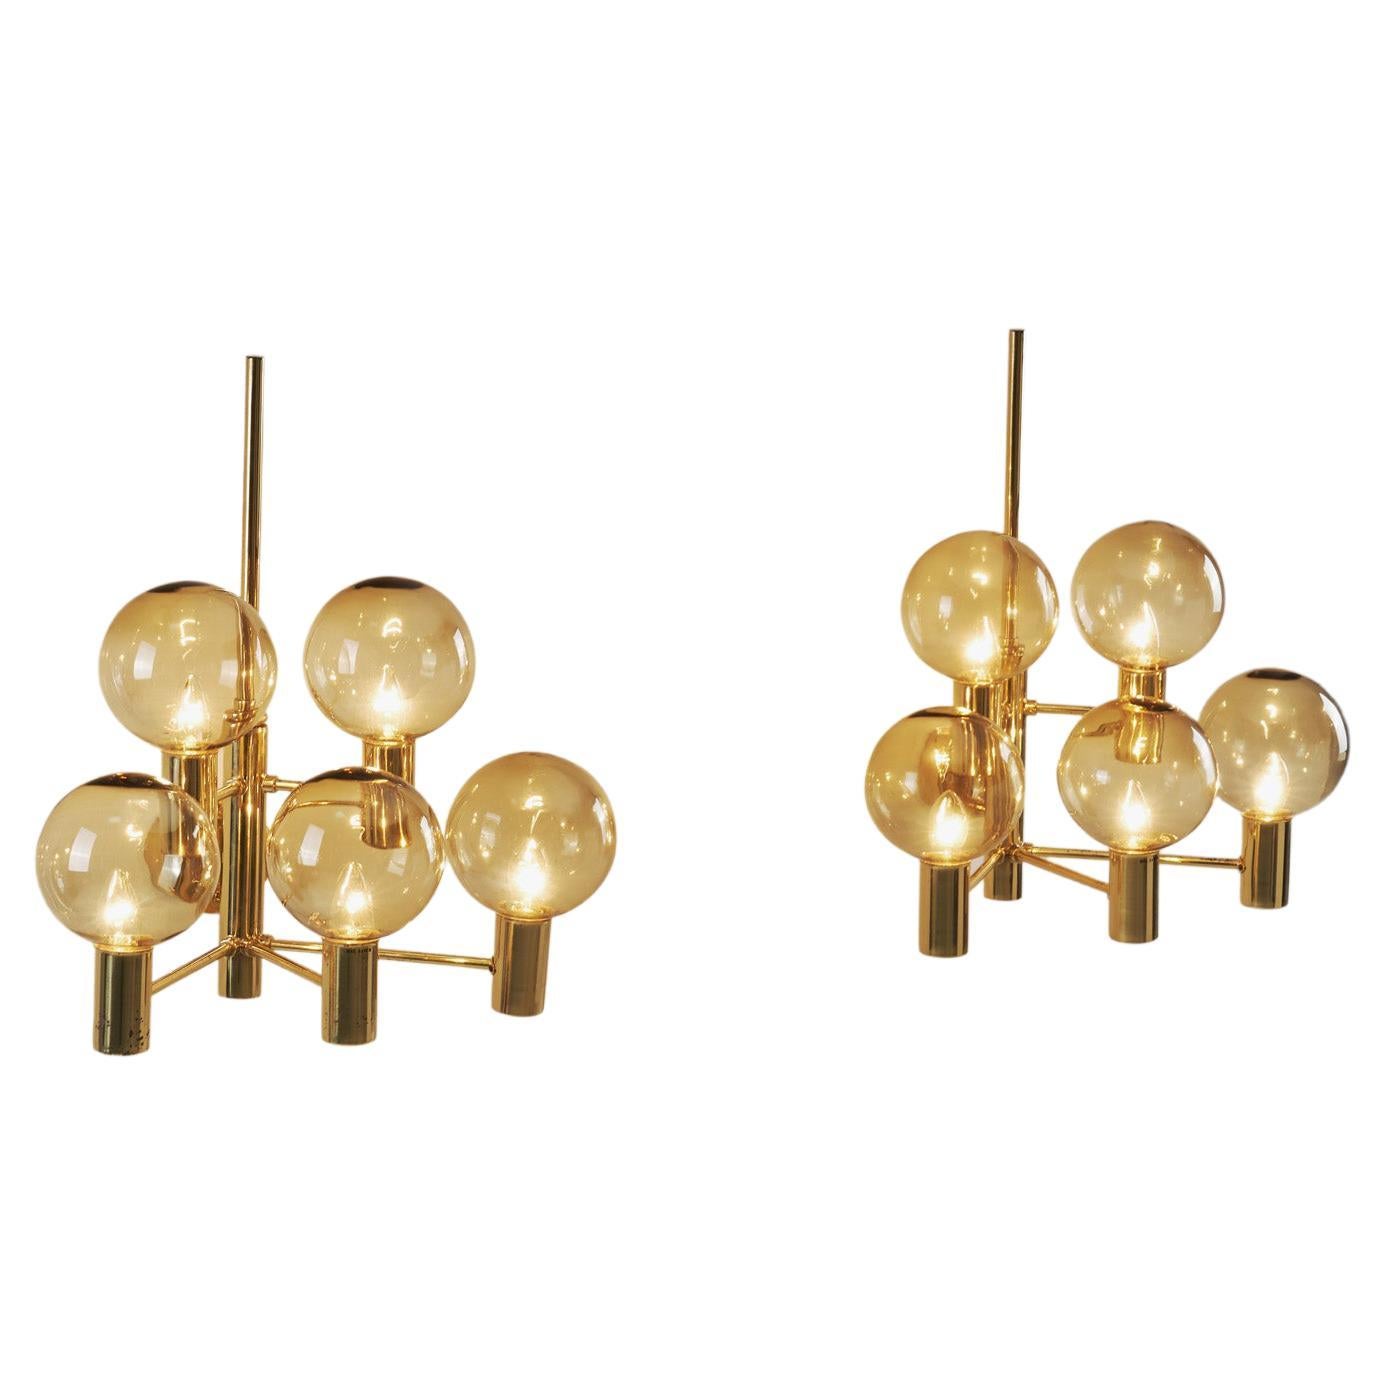 Hans-Agne Jakobsson Brass Wall Lamps with Smoked Glass Shades, Sweden 1960s